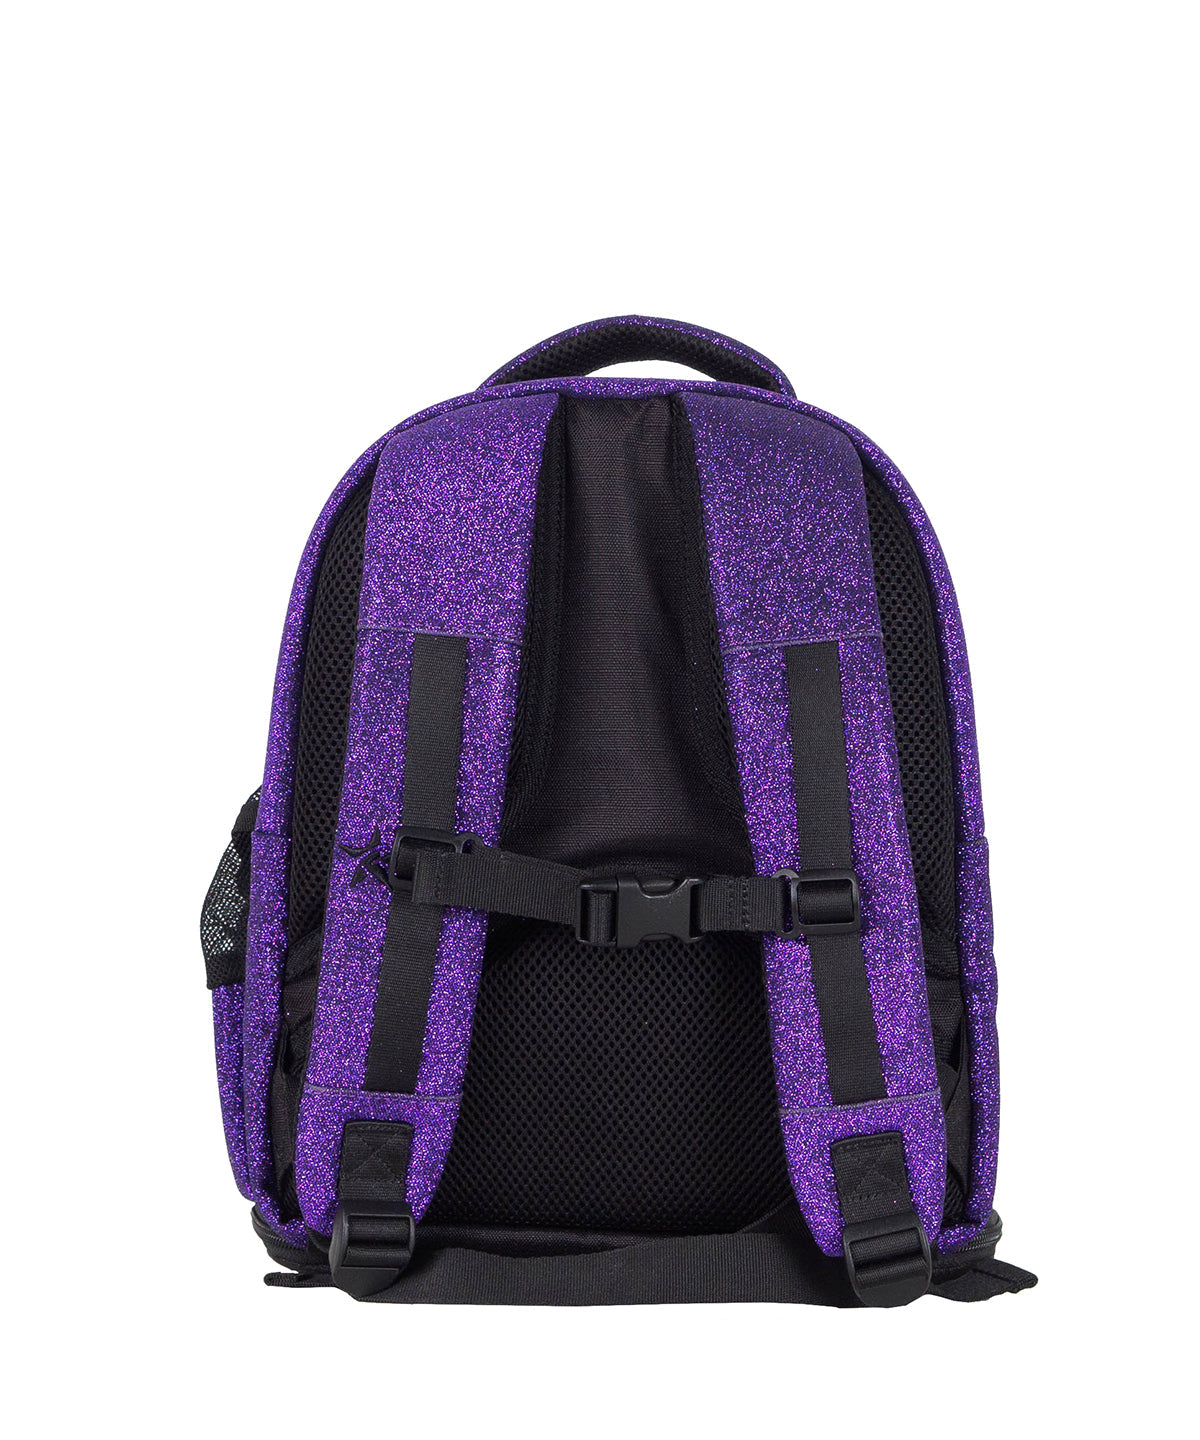 DREAM BAG IN AMETHYST WITH WHITE ZIPPER